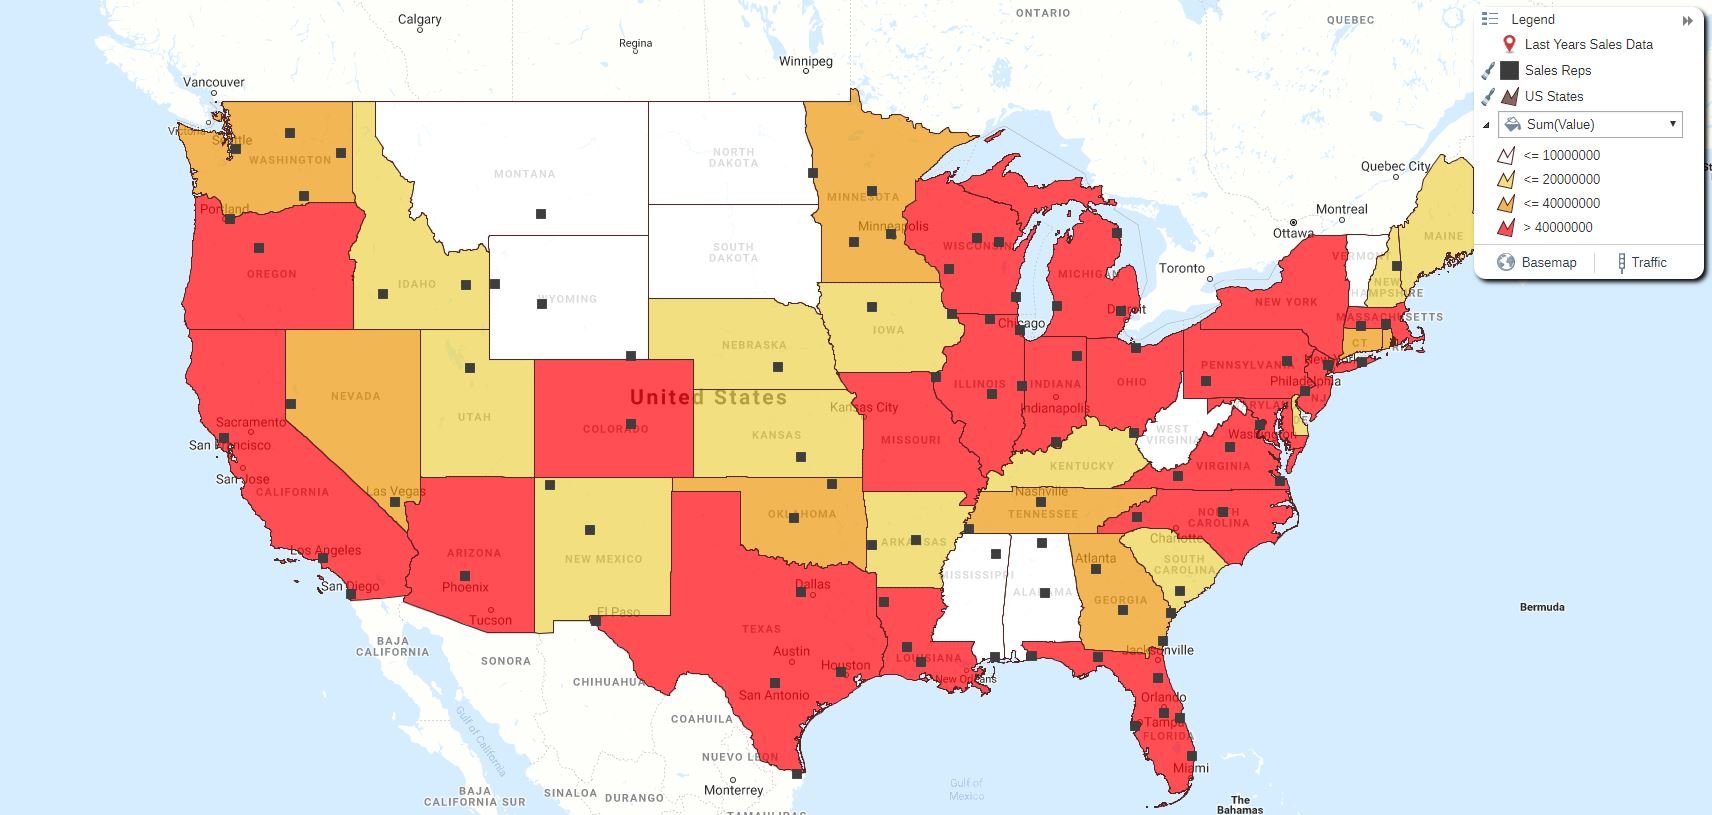 Regional Heat Map of Sales Value Overlaid with Sales Reps